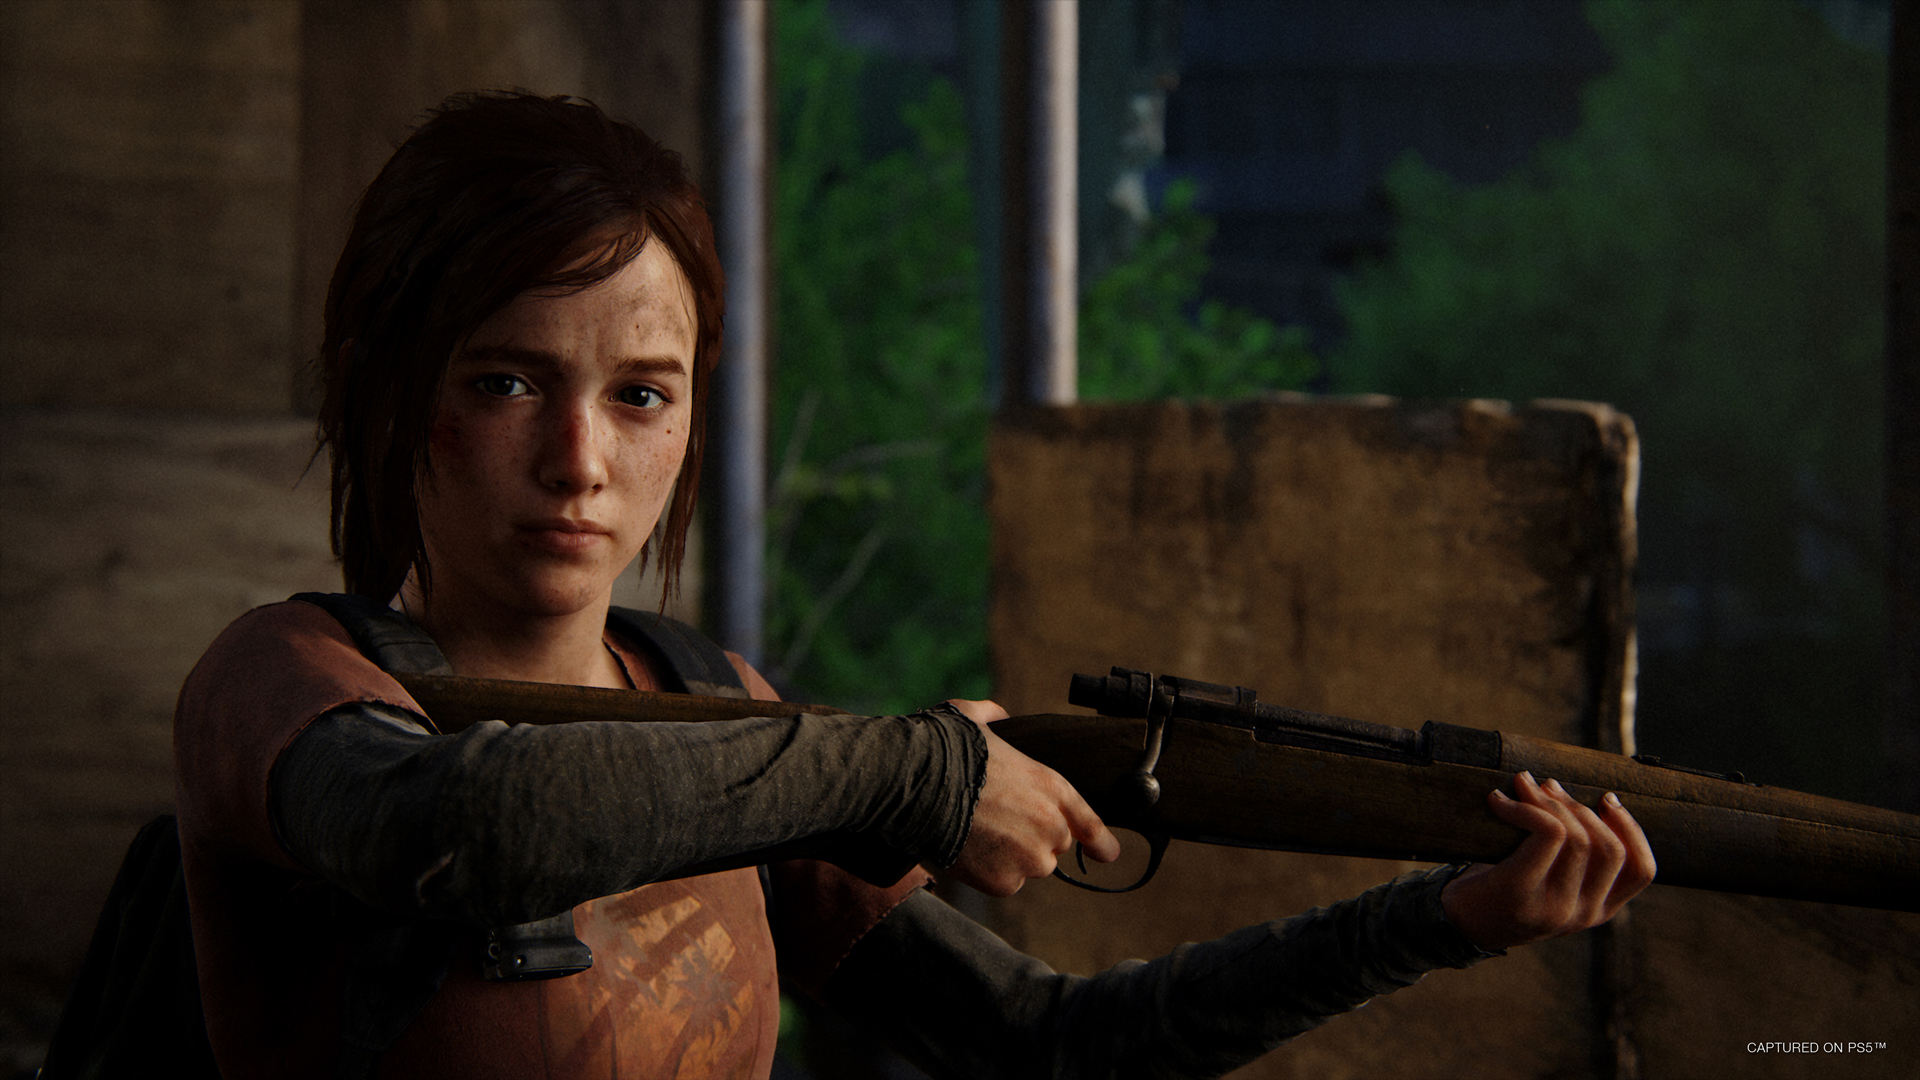 The Last of Us Part 1 (Update 1.1.1) on Steam Deck/OS in 800p 30+